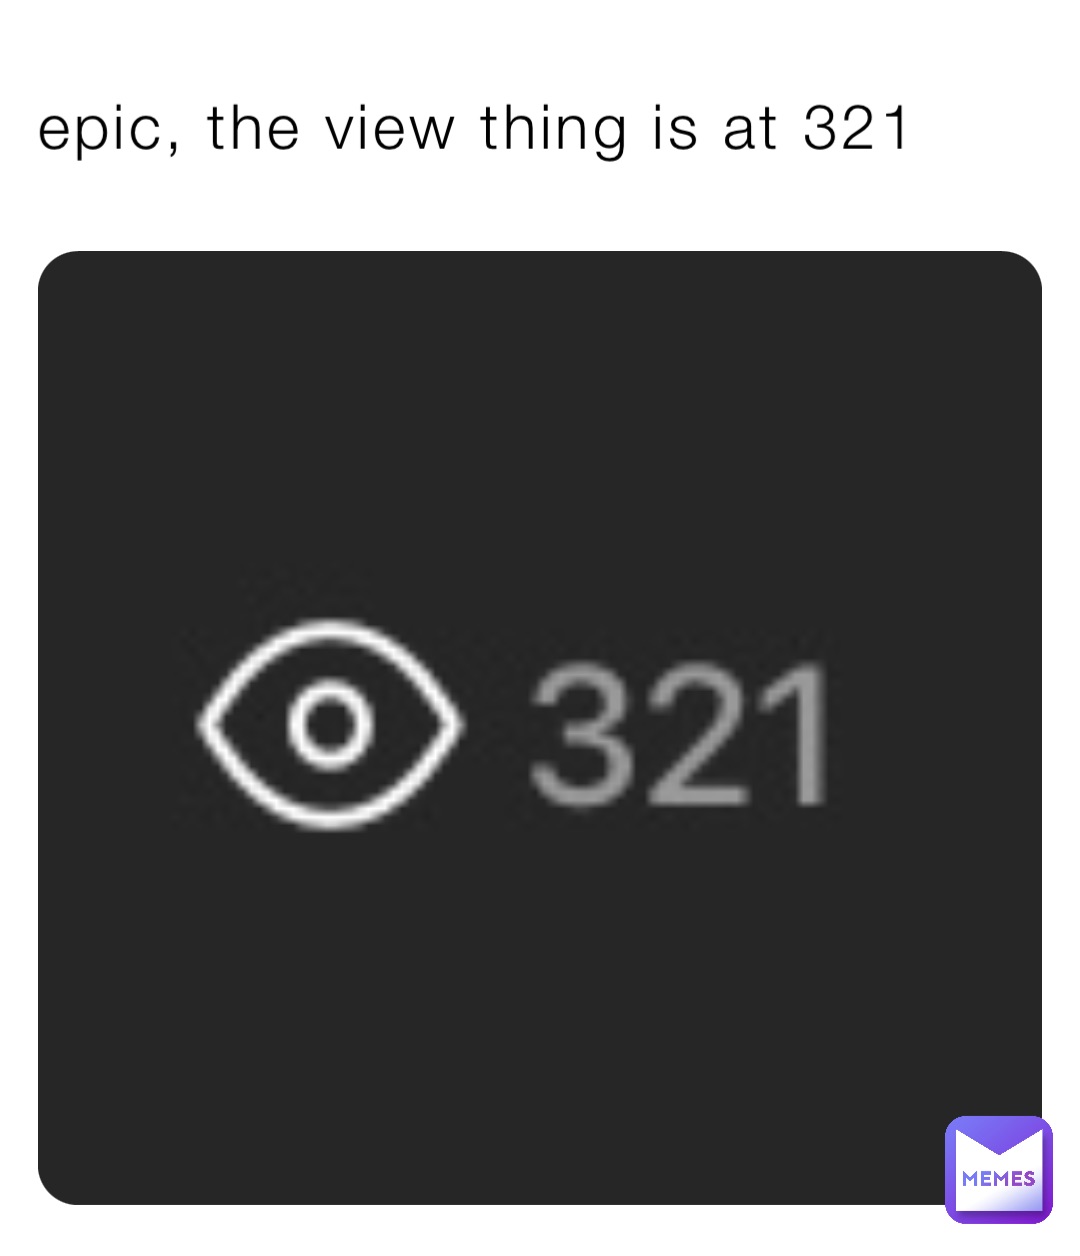 epic, the view thing is at 321